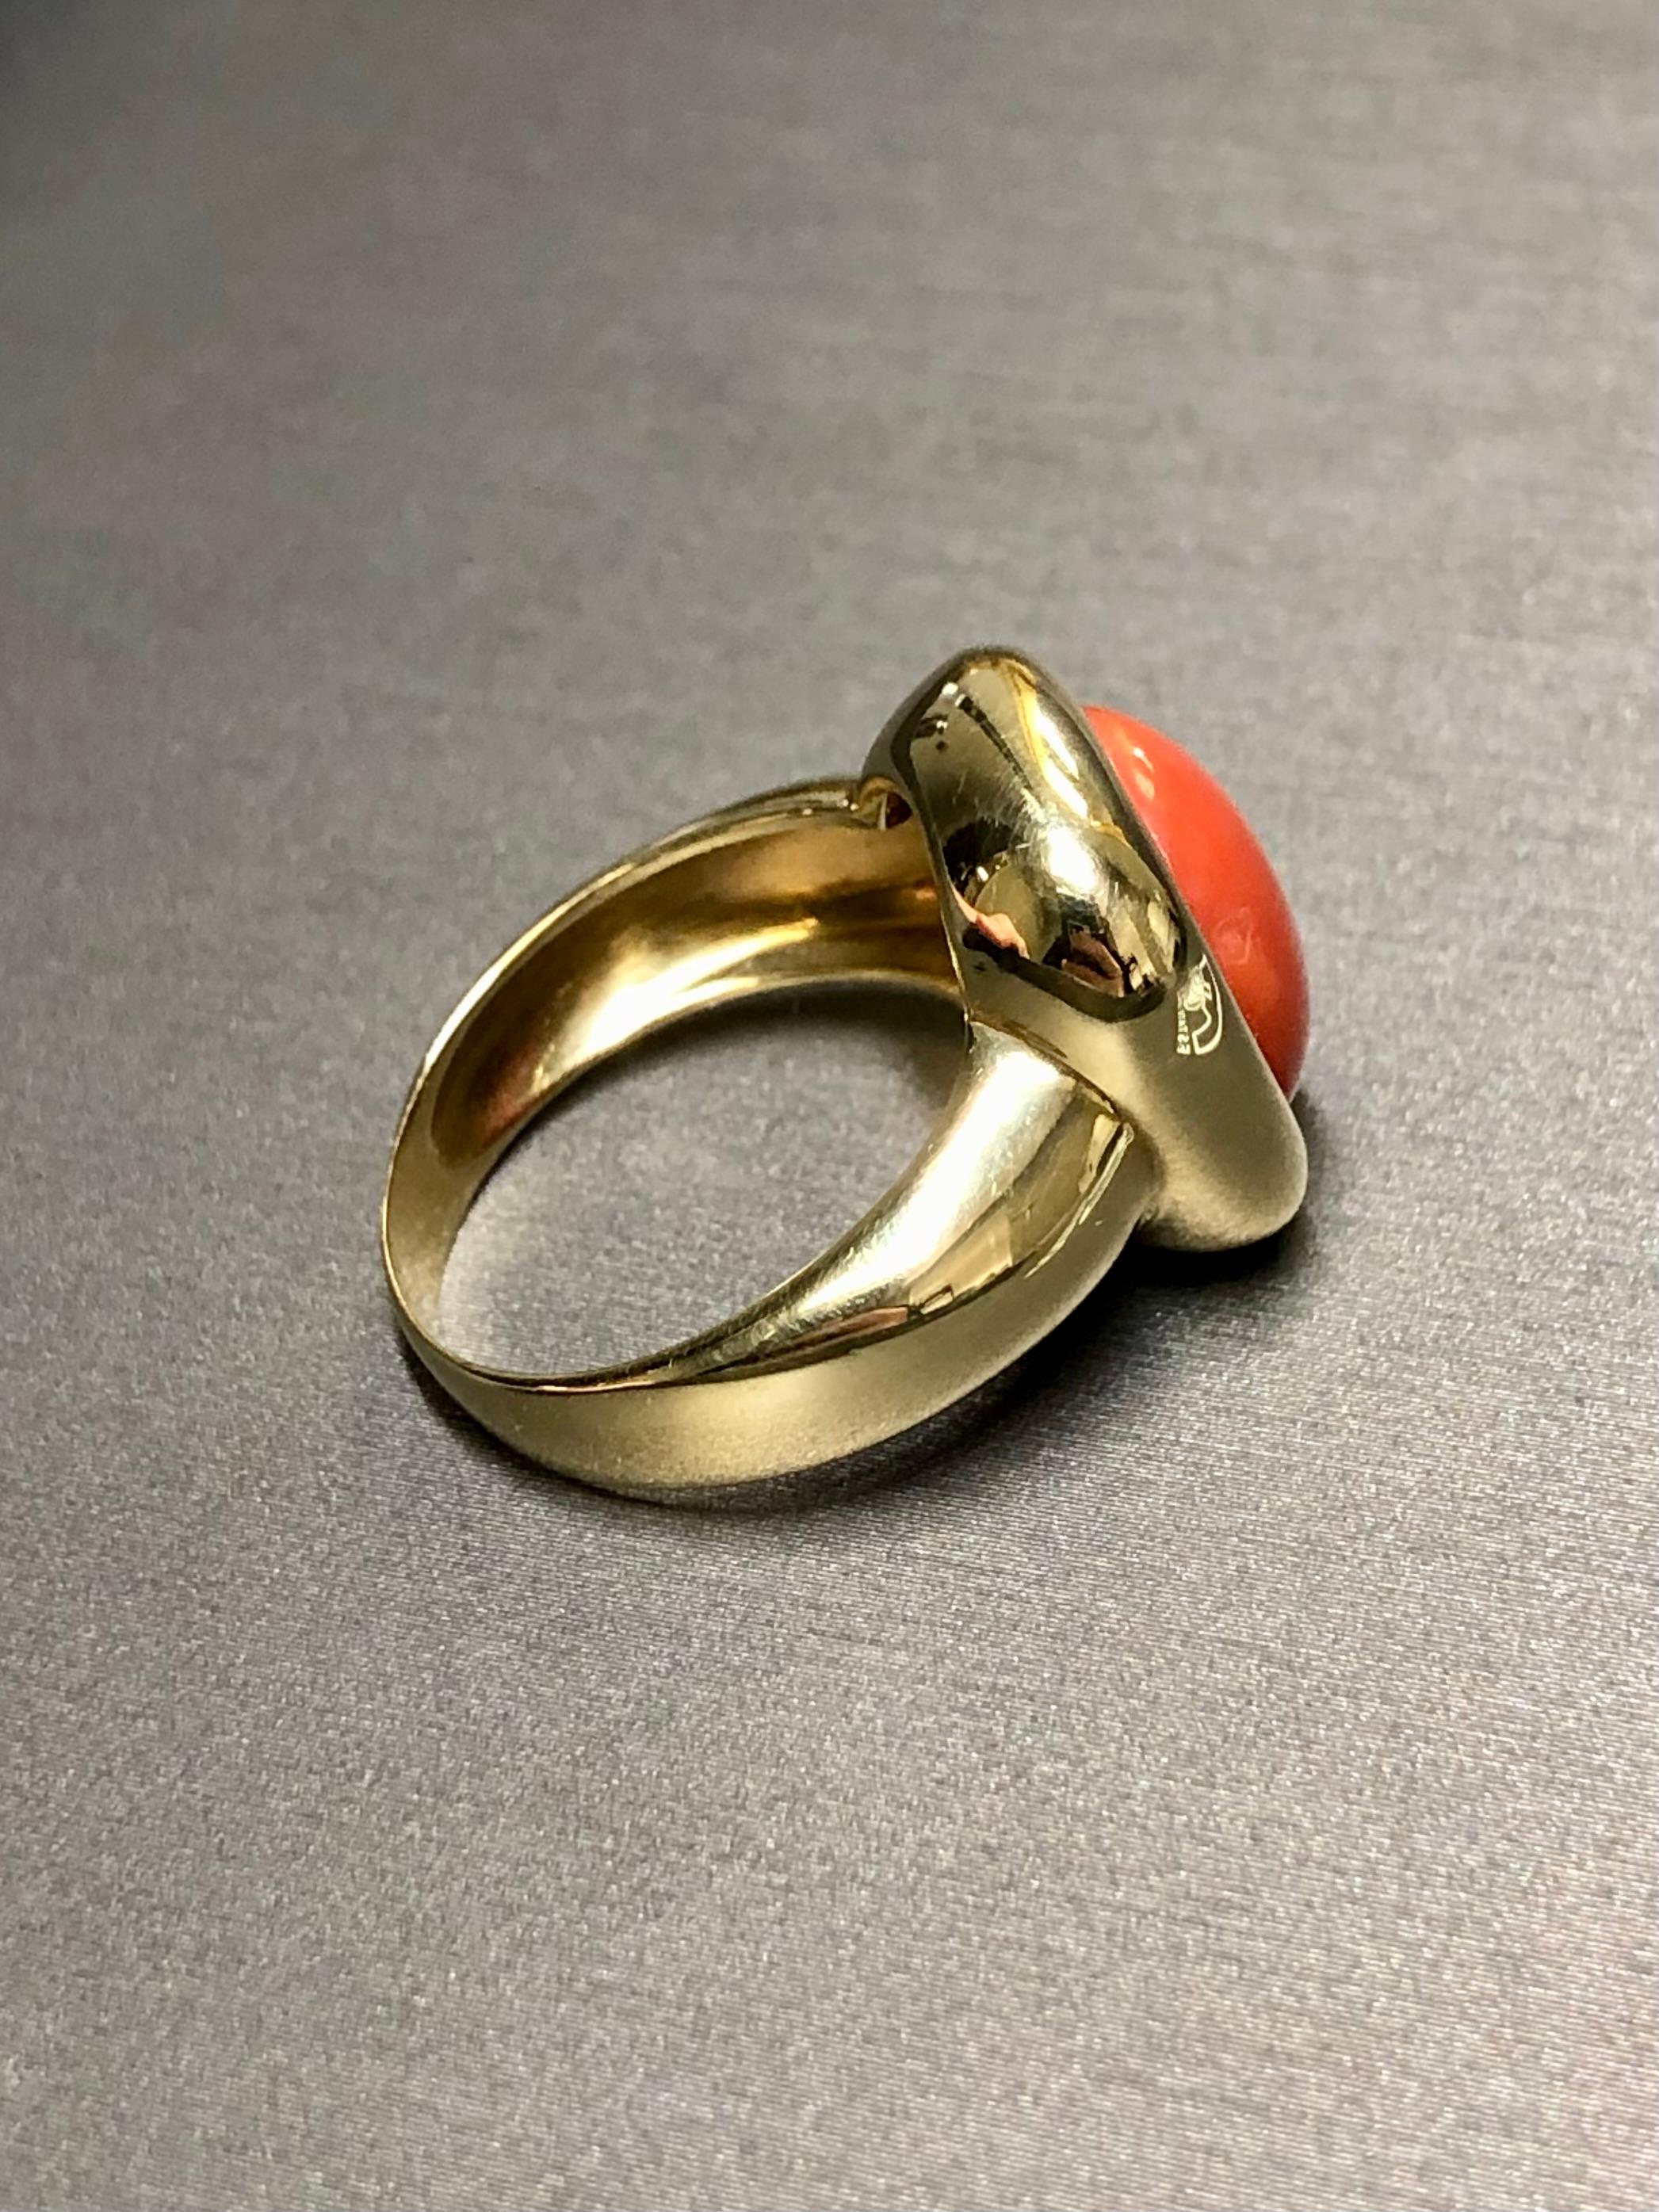 Cabochon A simple yet bold statement ring done in high polished 18K yellow gold and cente